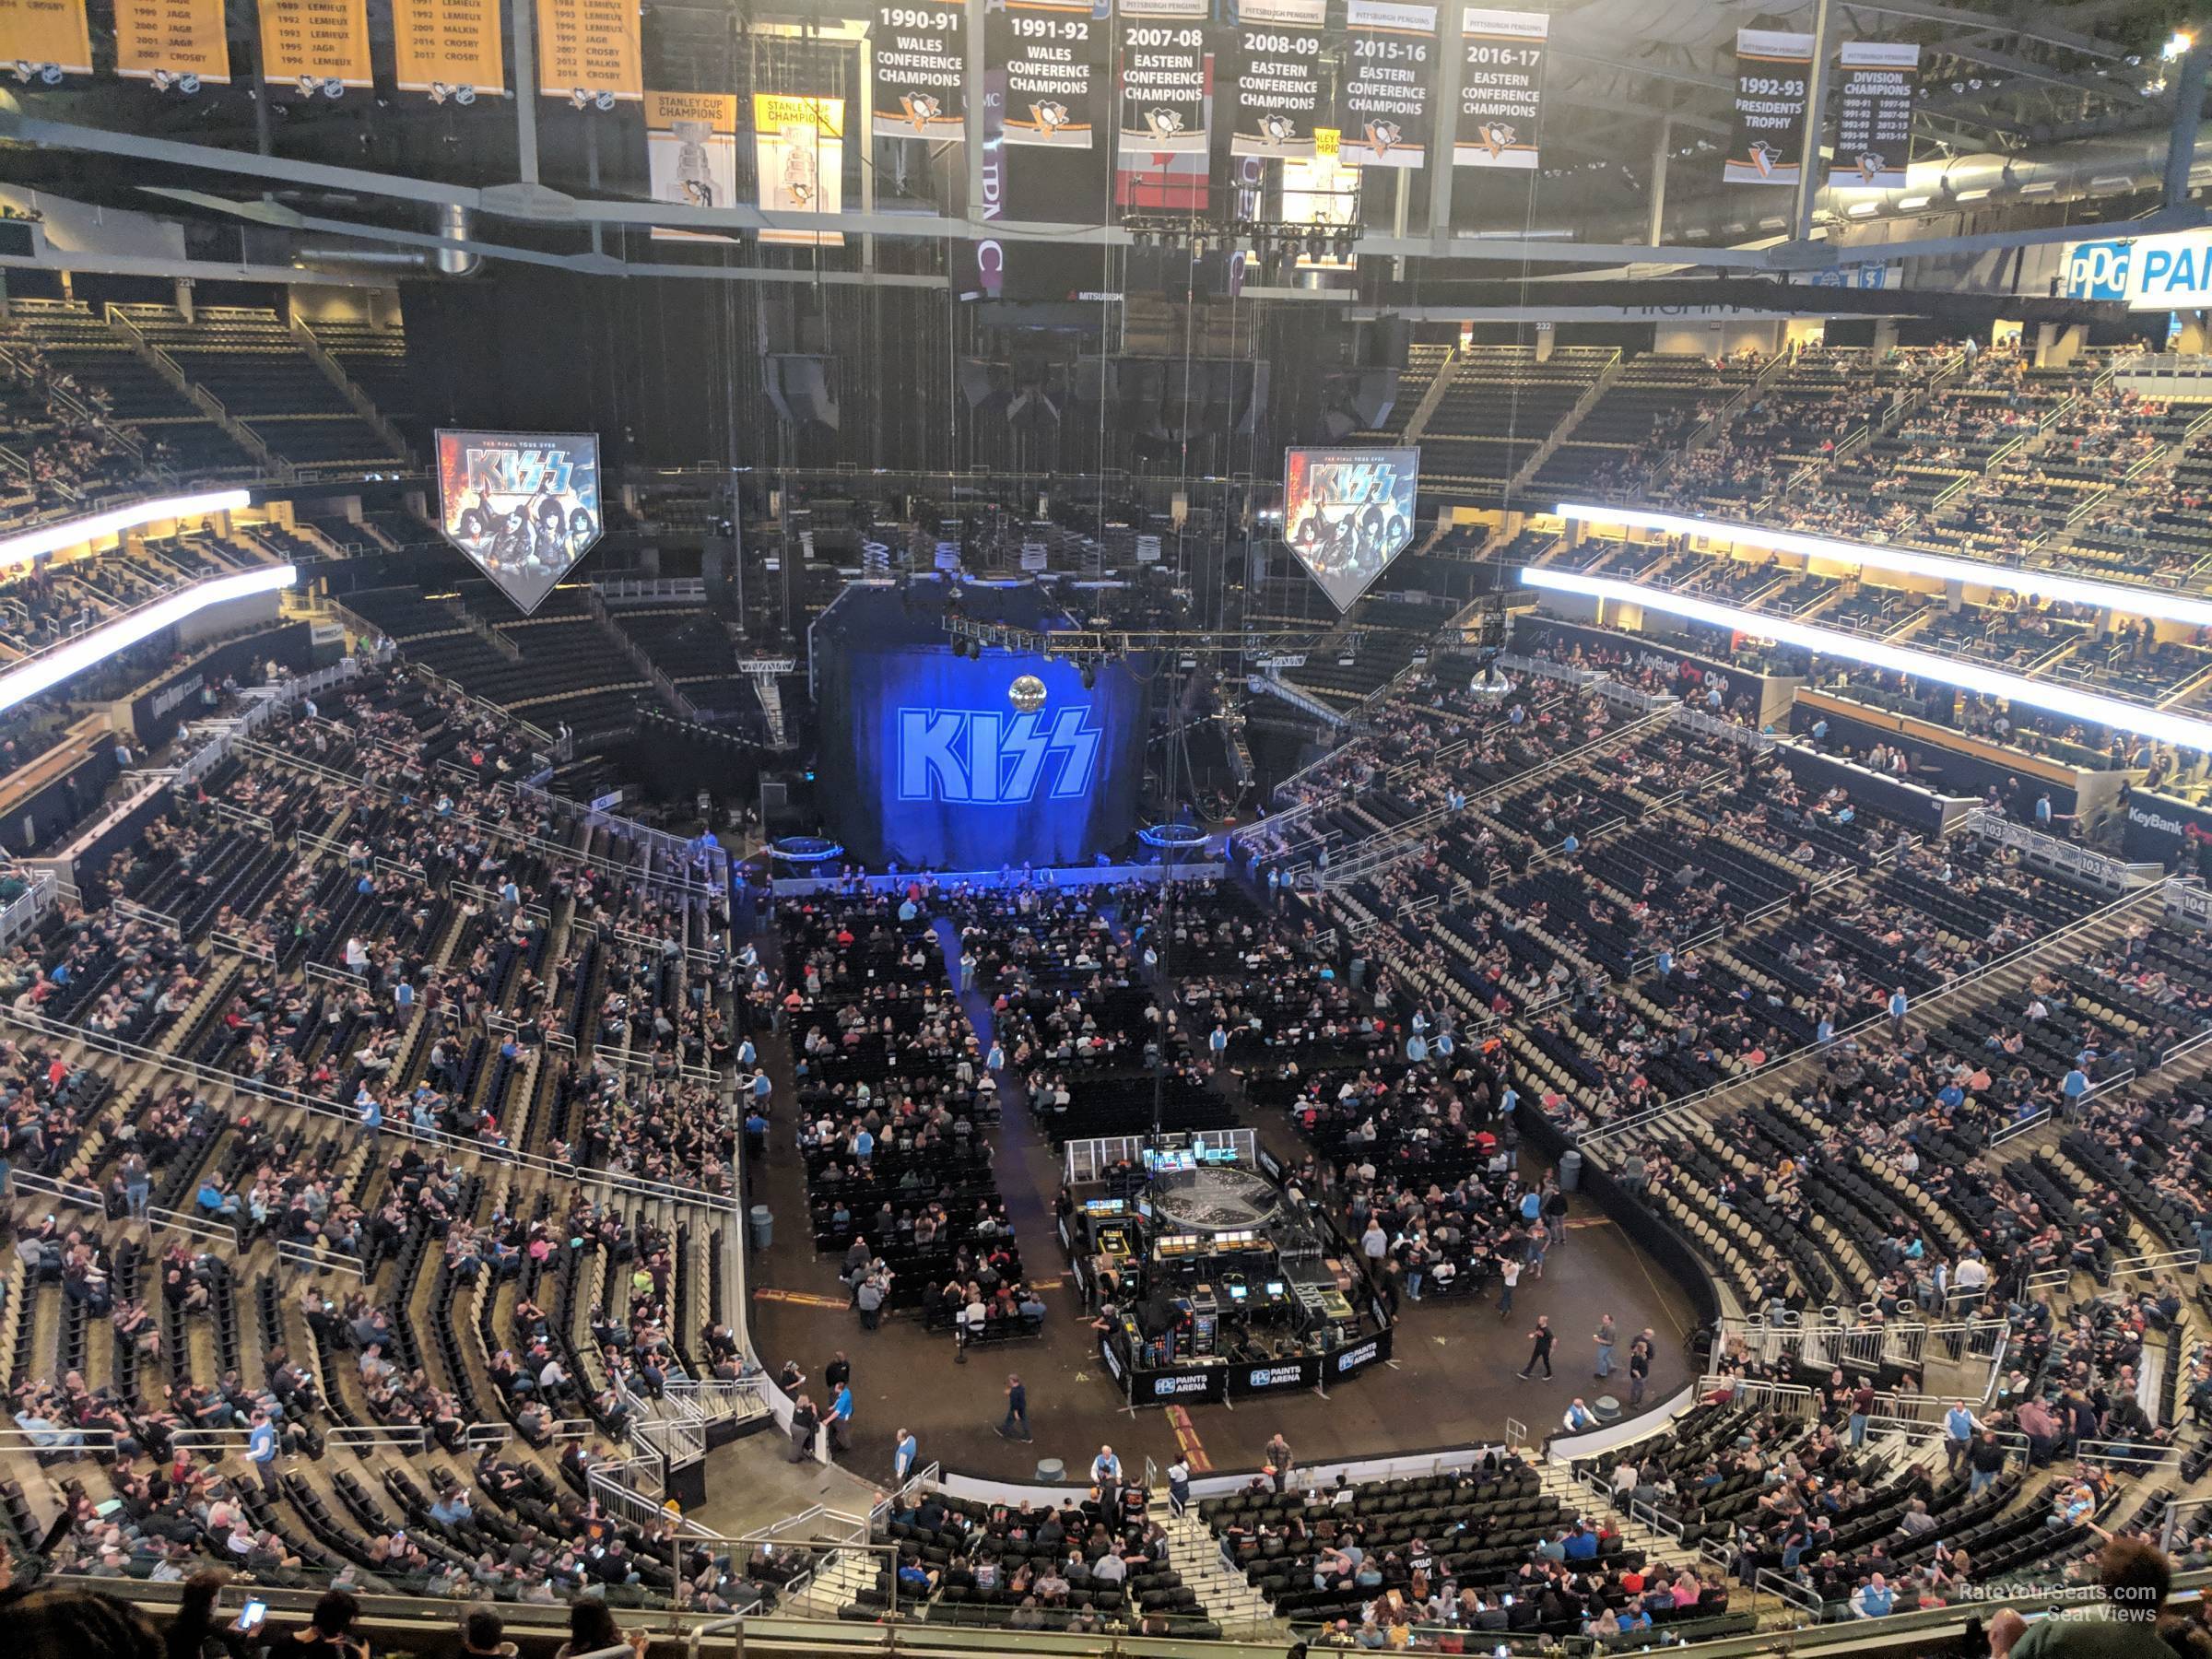 Switching over PPG Paints Arena for different events